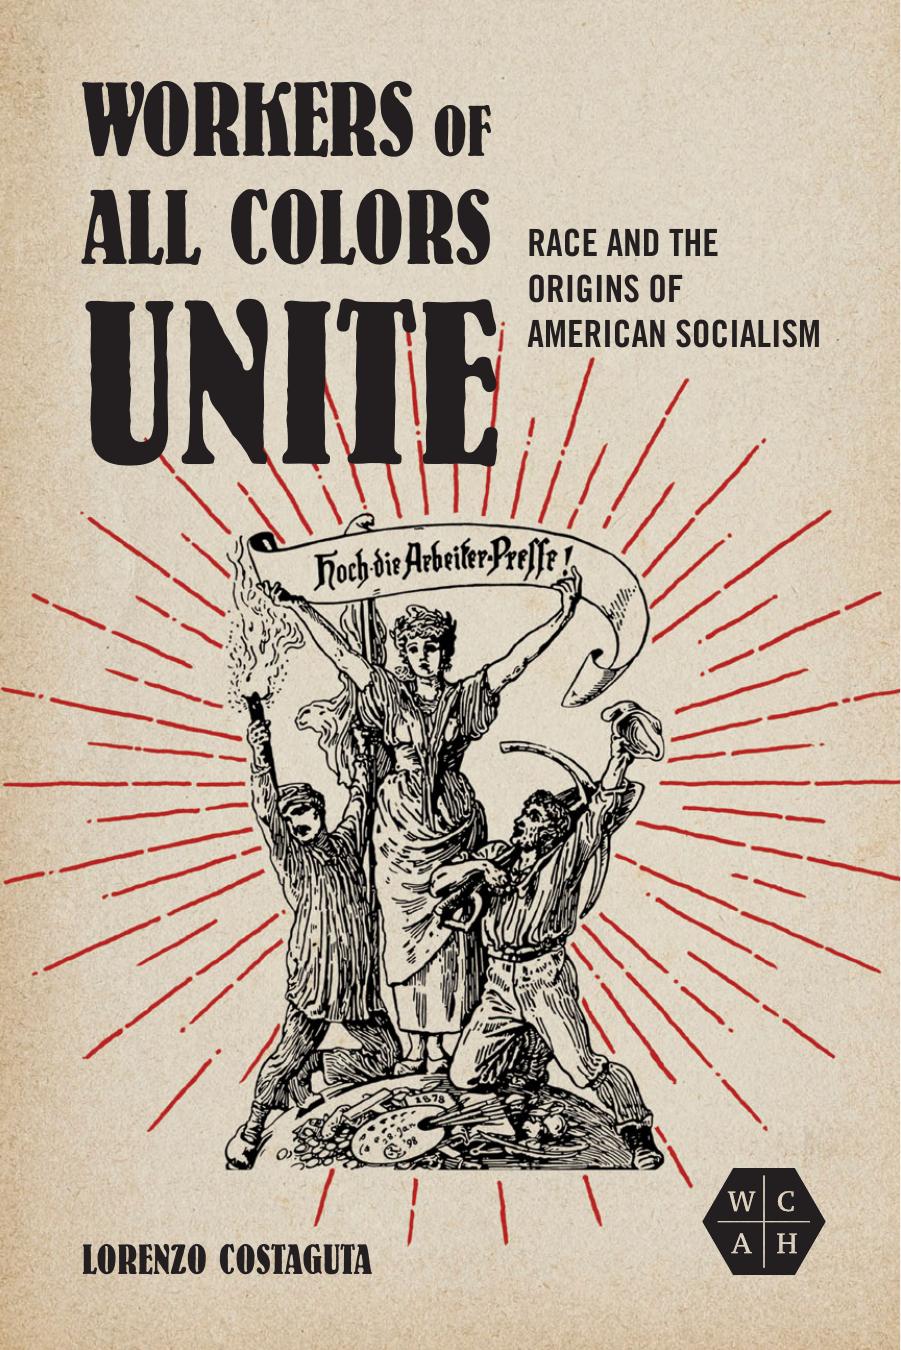 Workers of All Colors Unite by Lorenzo Costaguta